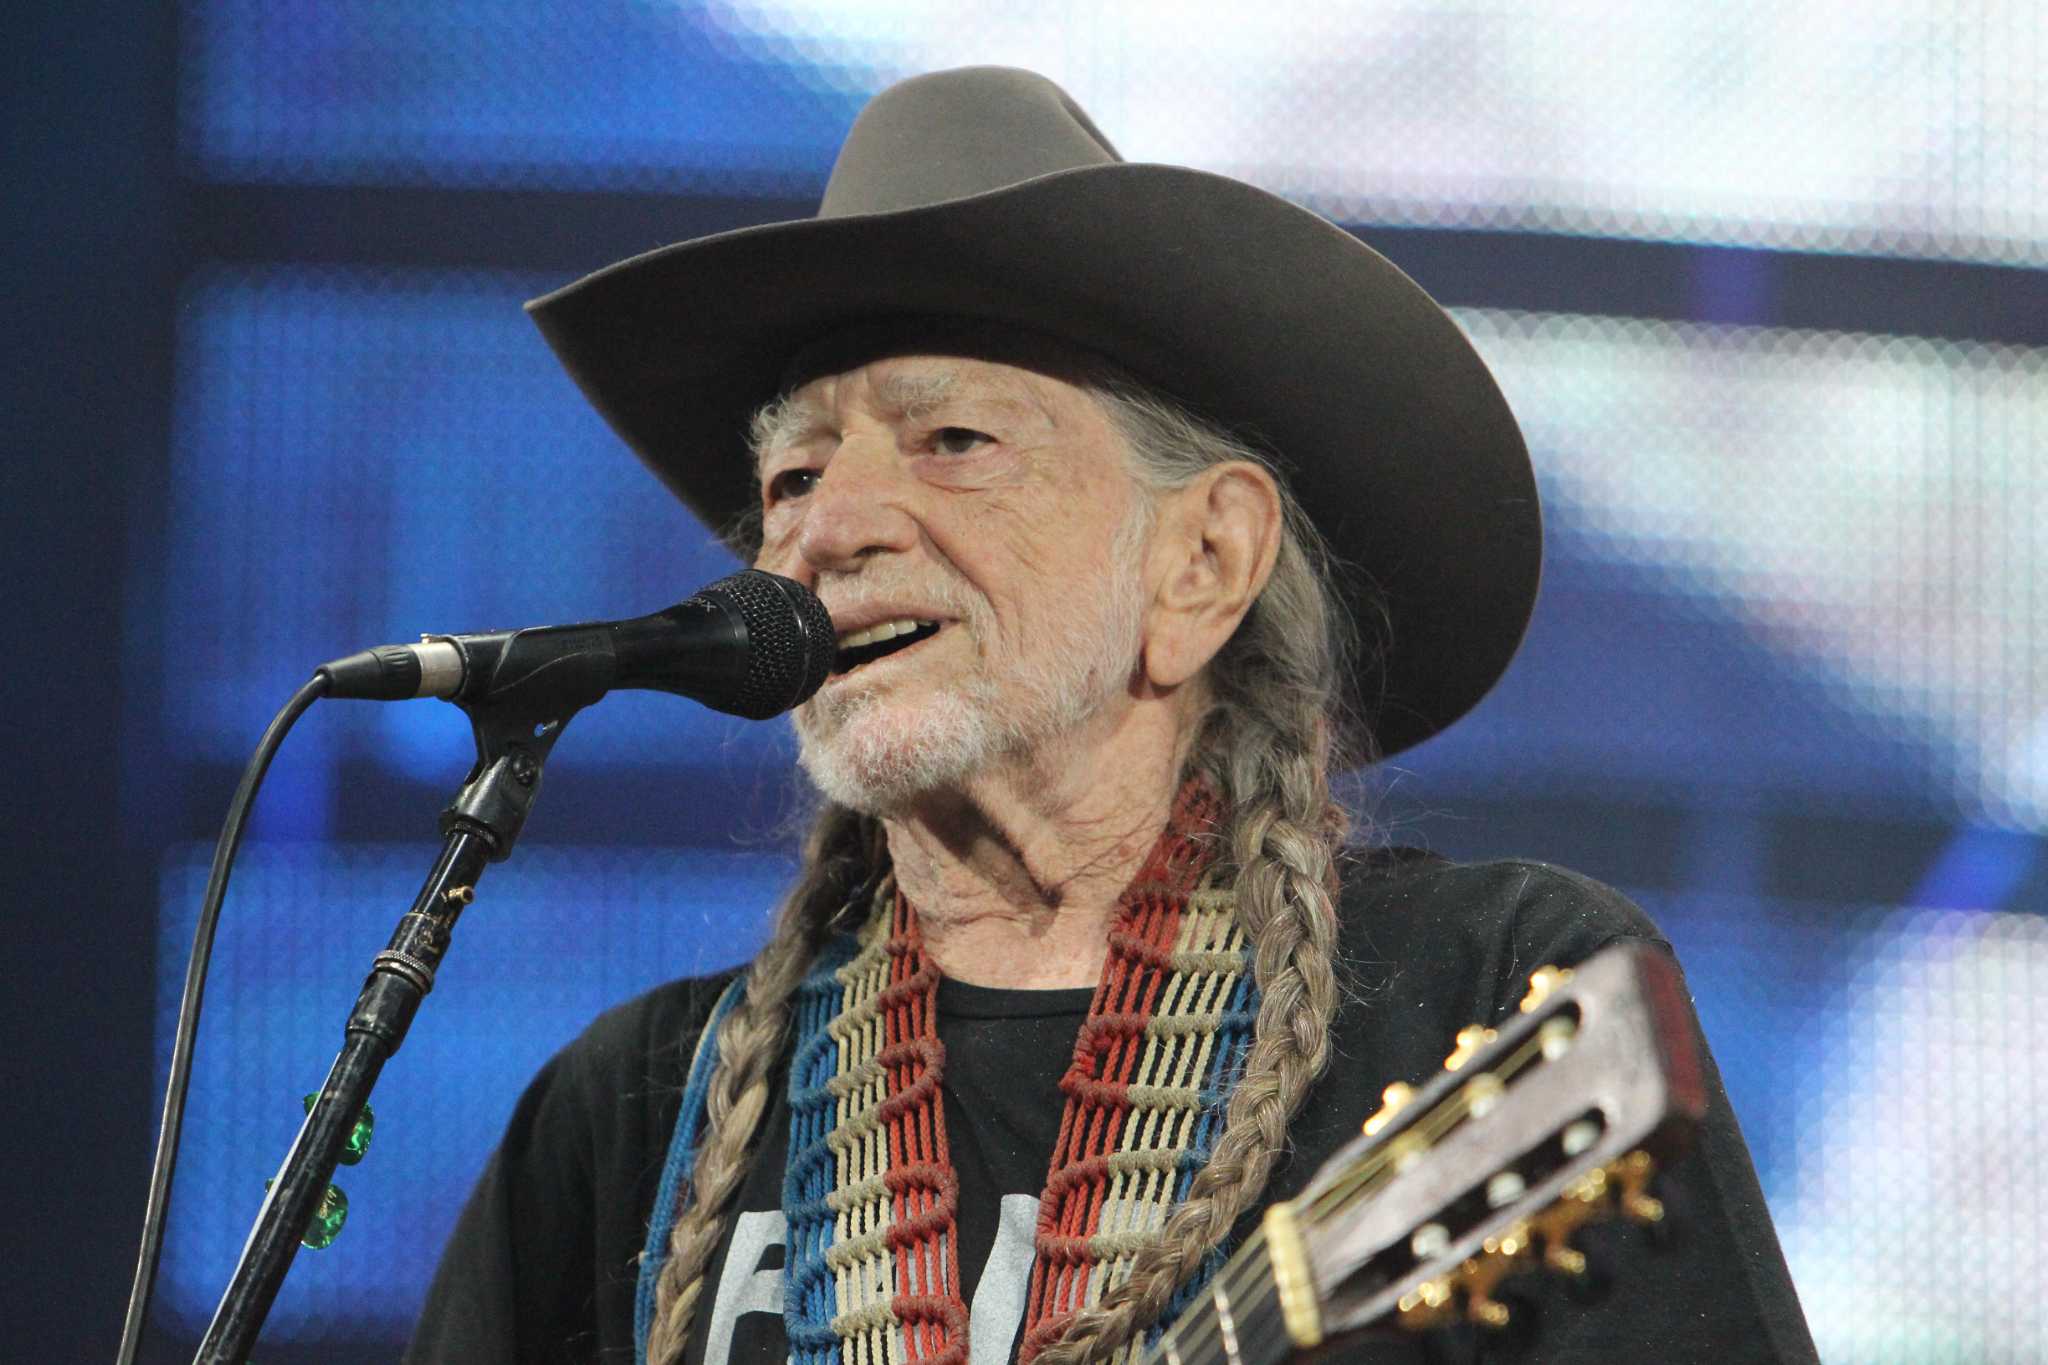 Willie Nelson to release new album in April